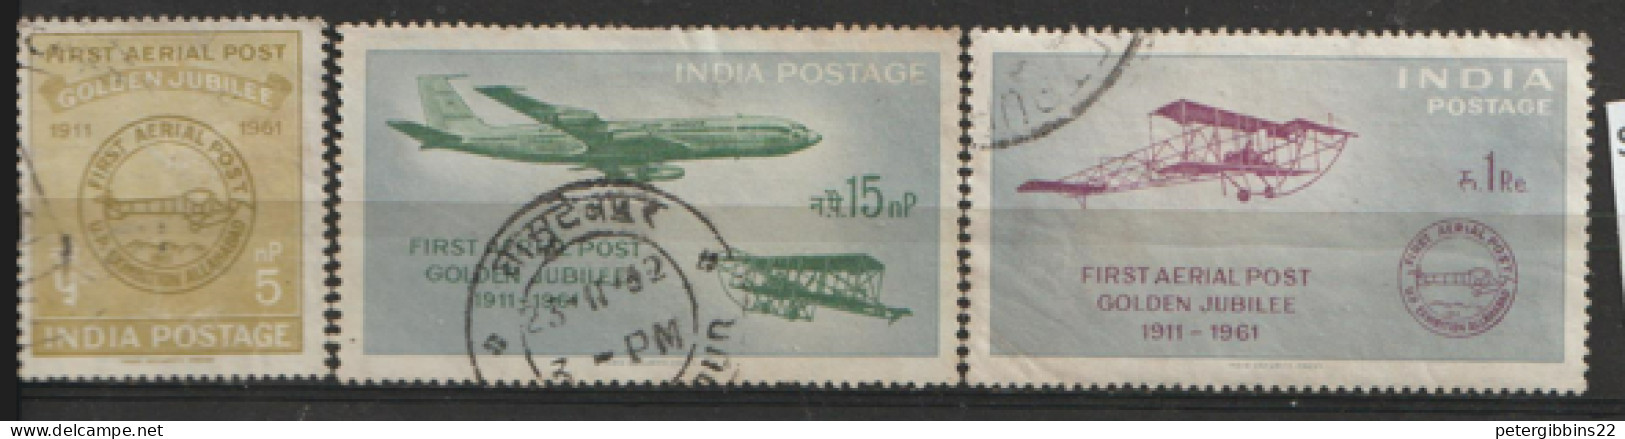 India  1960 SG  434-6  First Air Mail   Fine Used   - Used Stamps